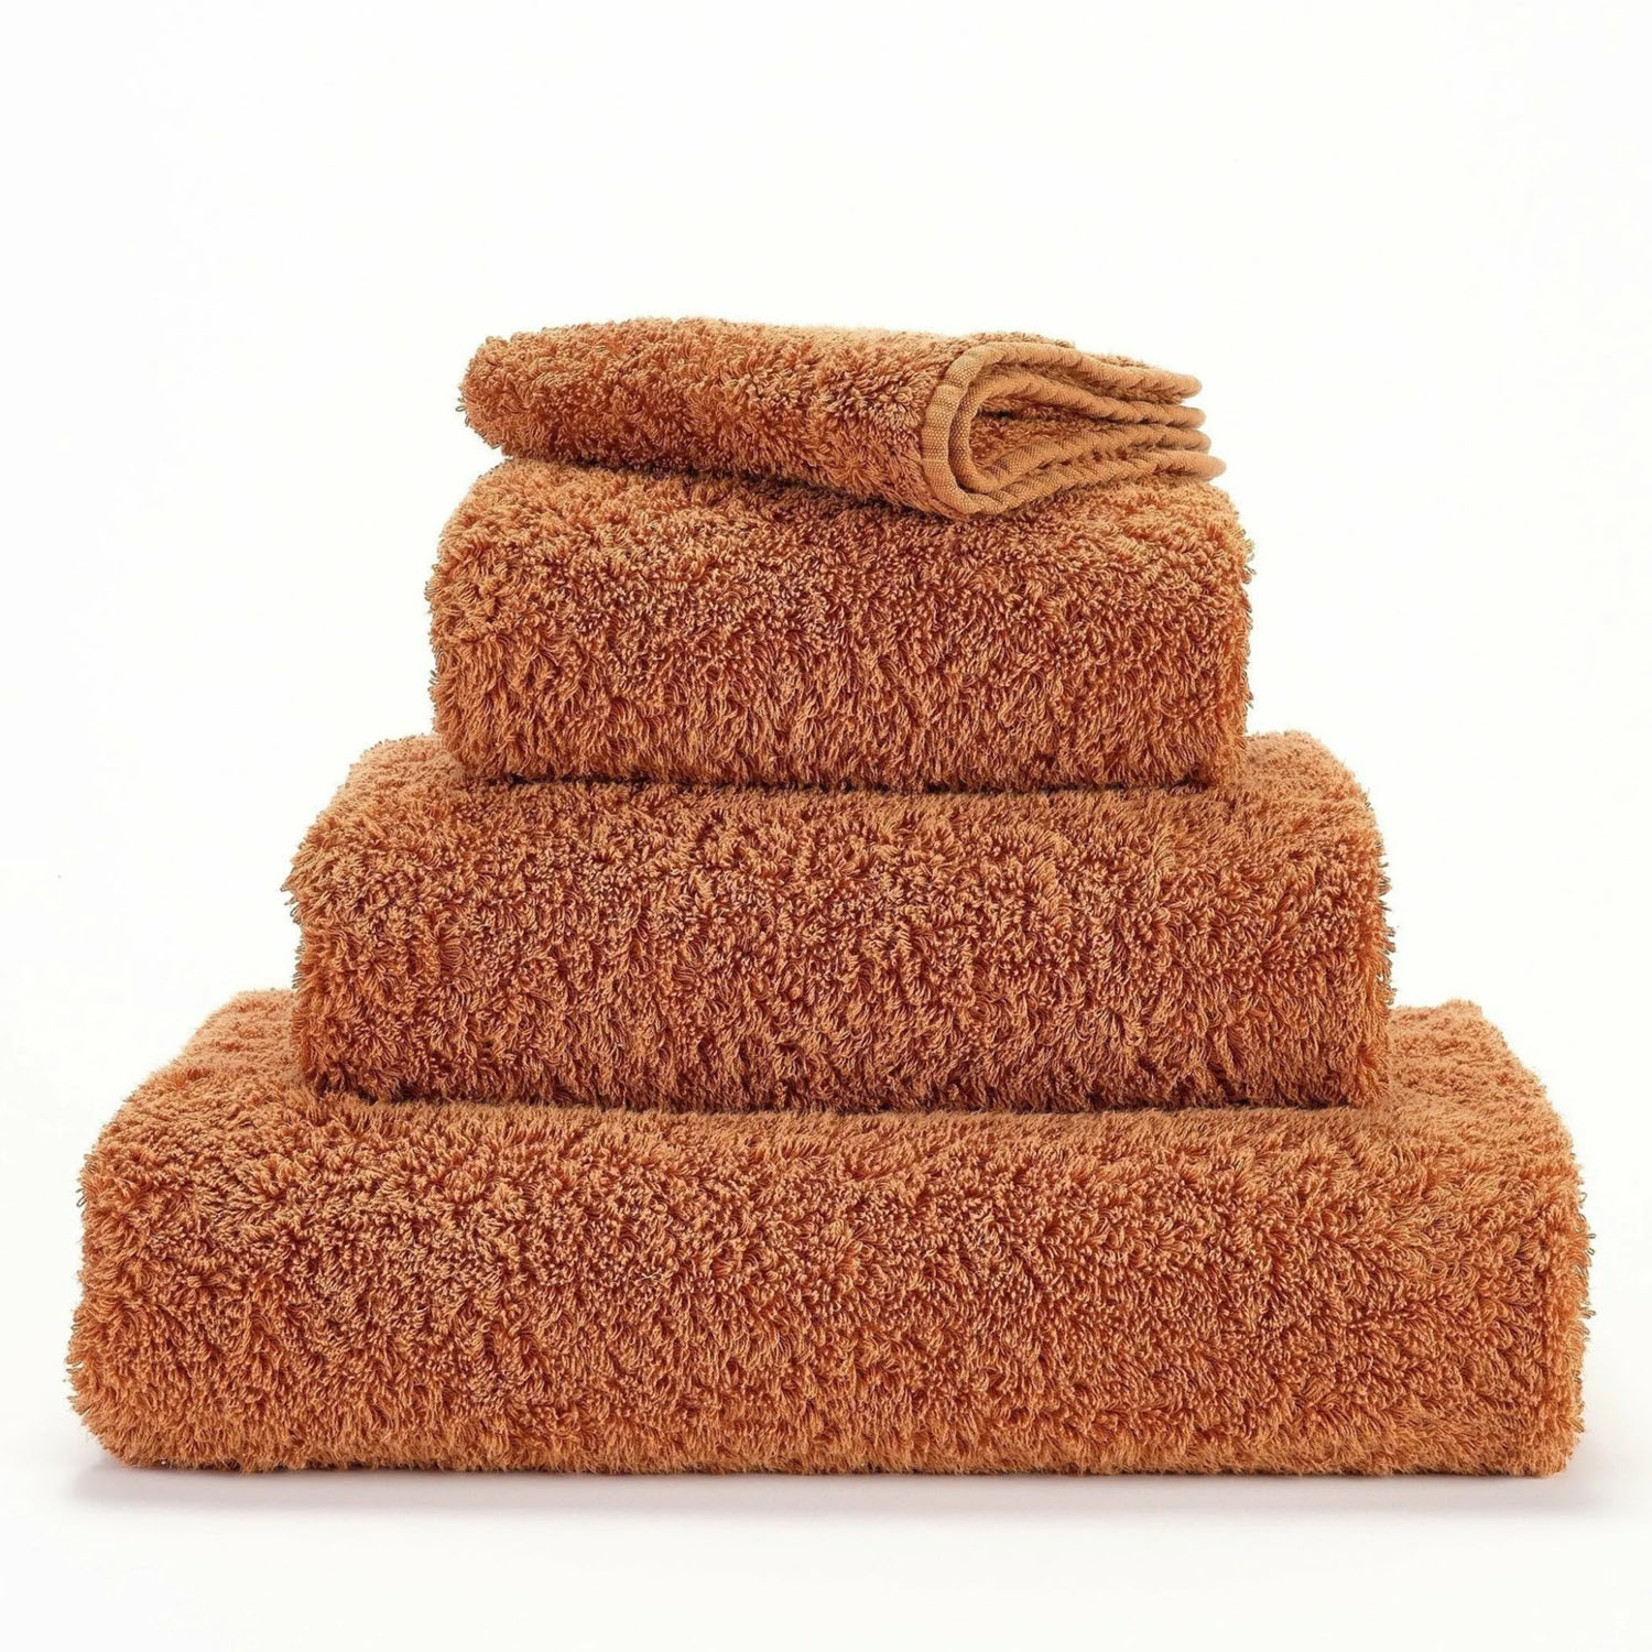 Abyss Abyss Super Pile Towels 737 Caramel